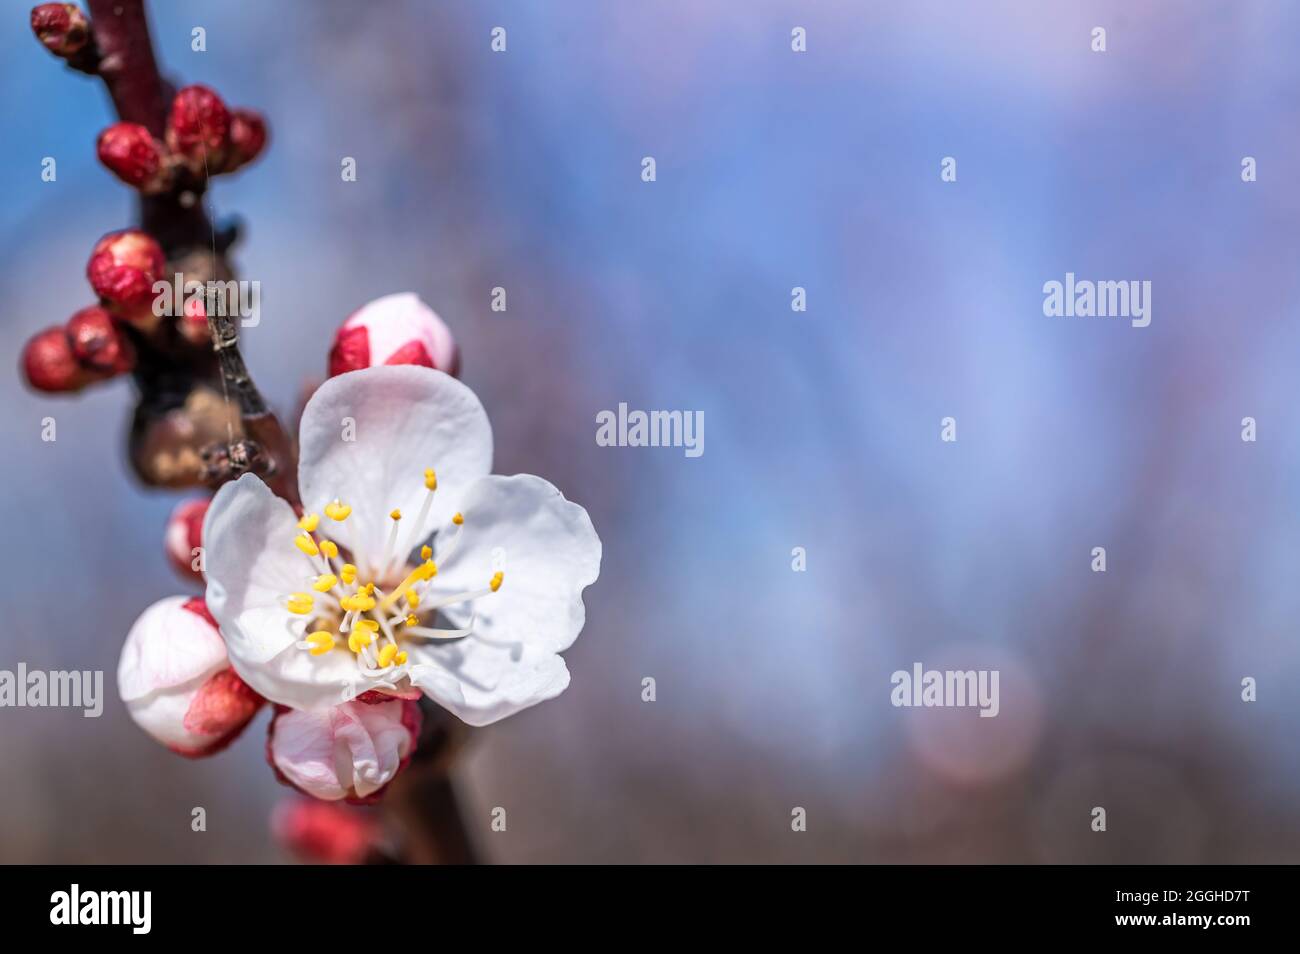 Blooming branch of an apricot tree with various inflorescences and copy space Stock Photo